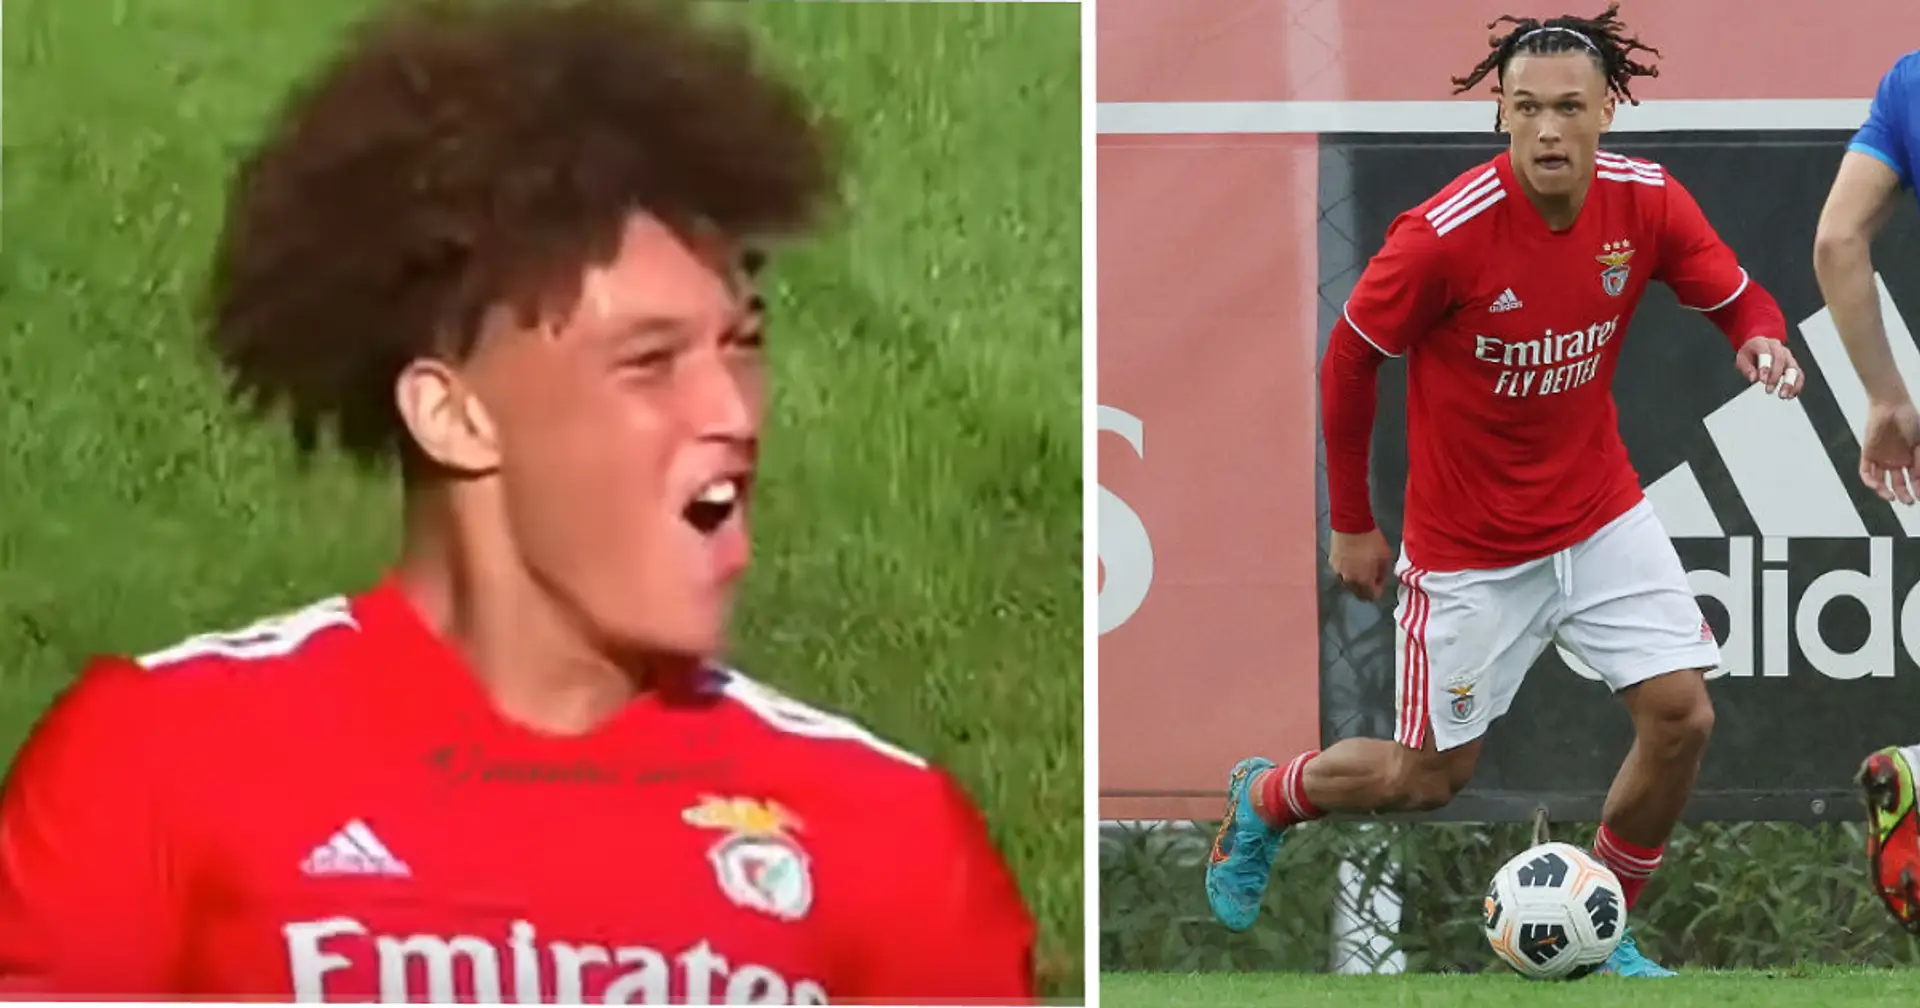 Chelsea sign 18-year-old winger from Benfica (reliability: 5 stars)